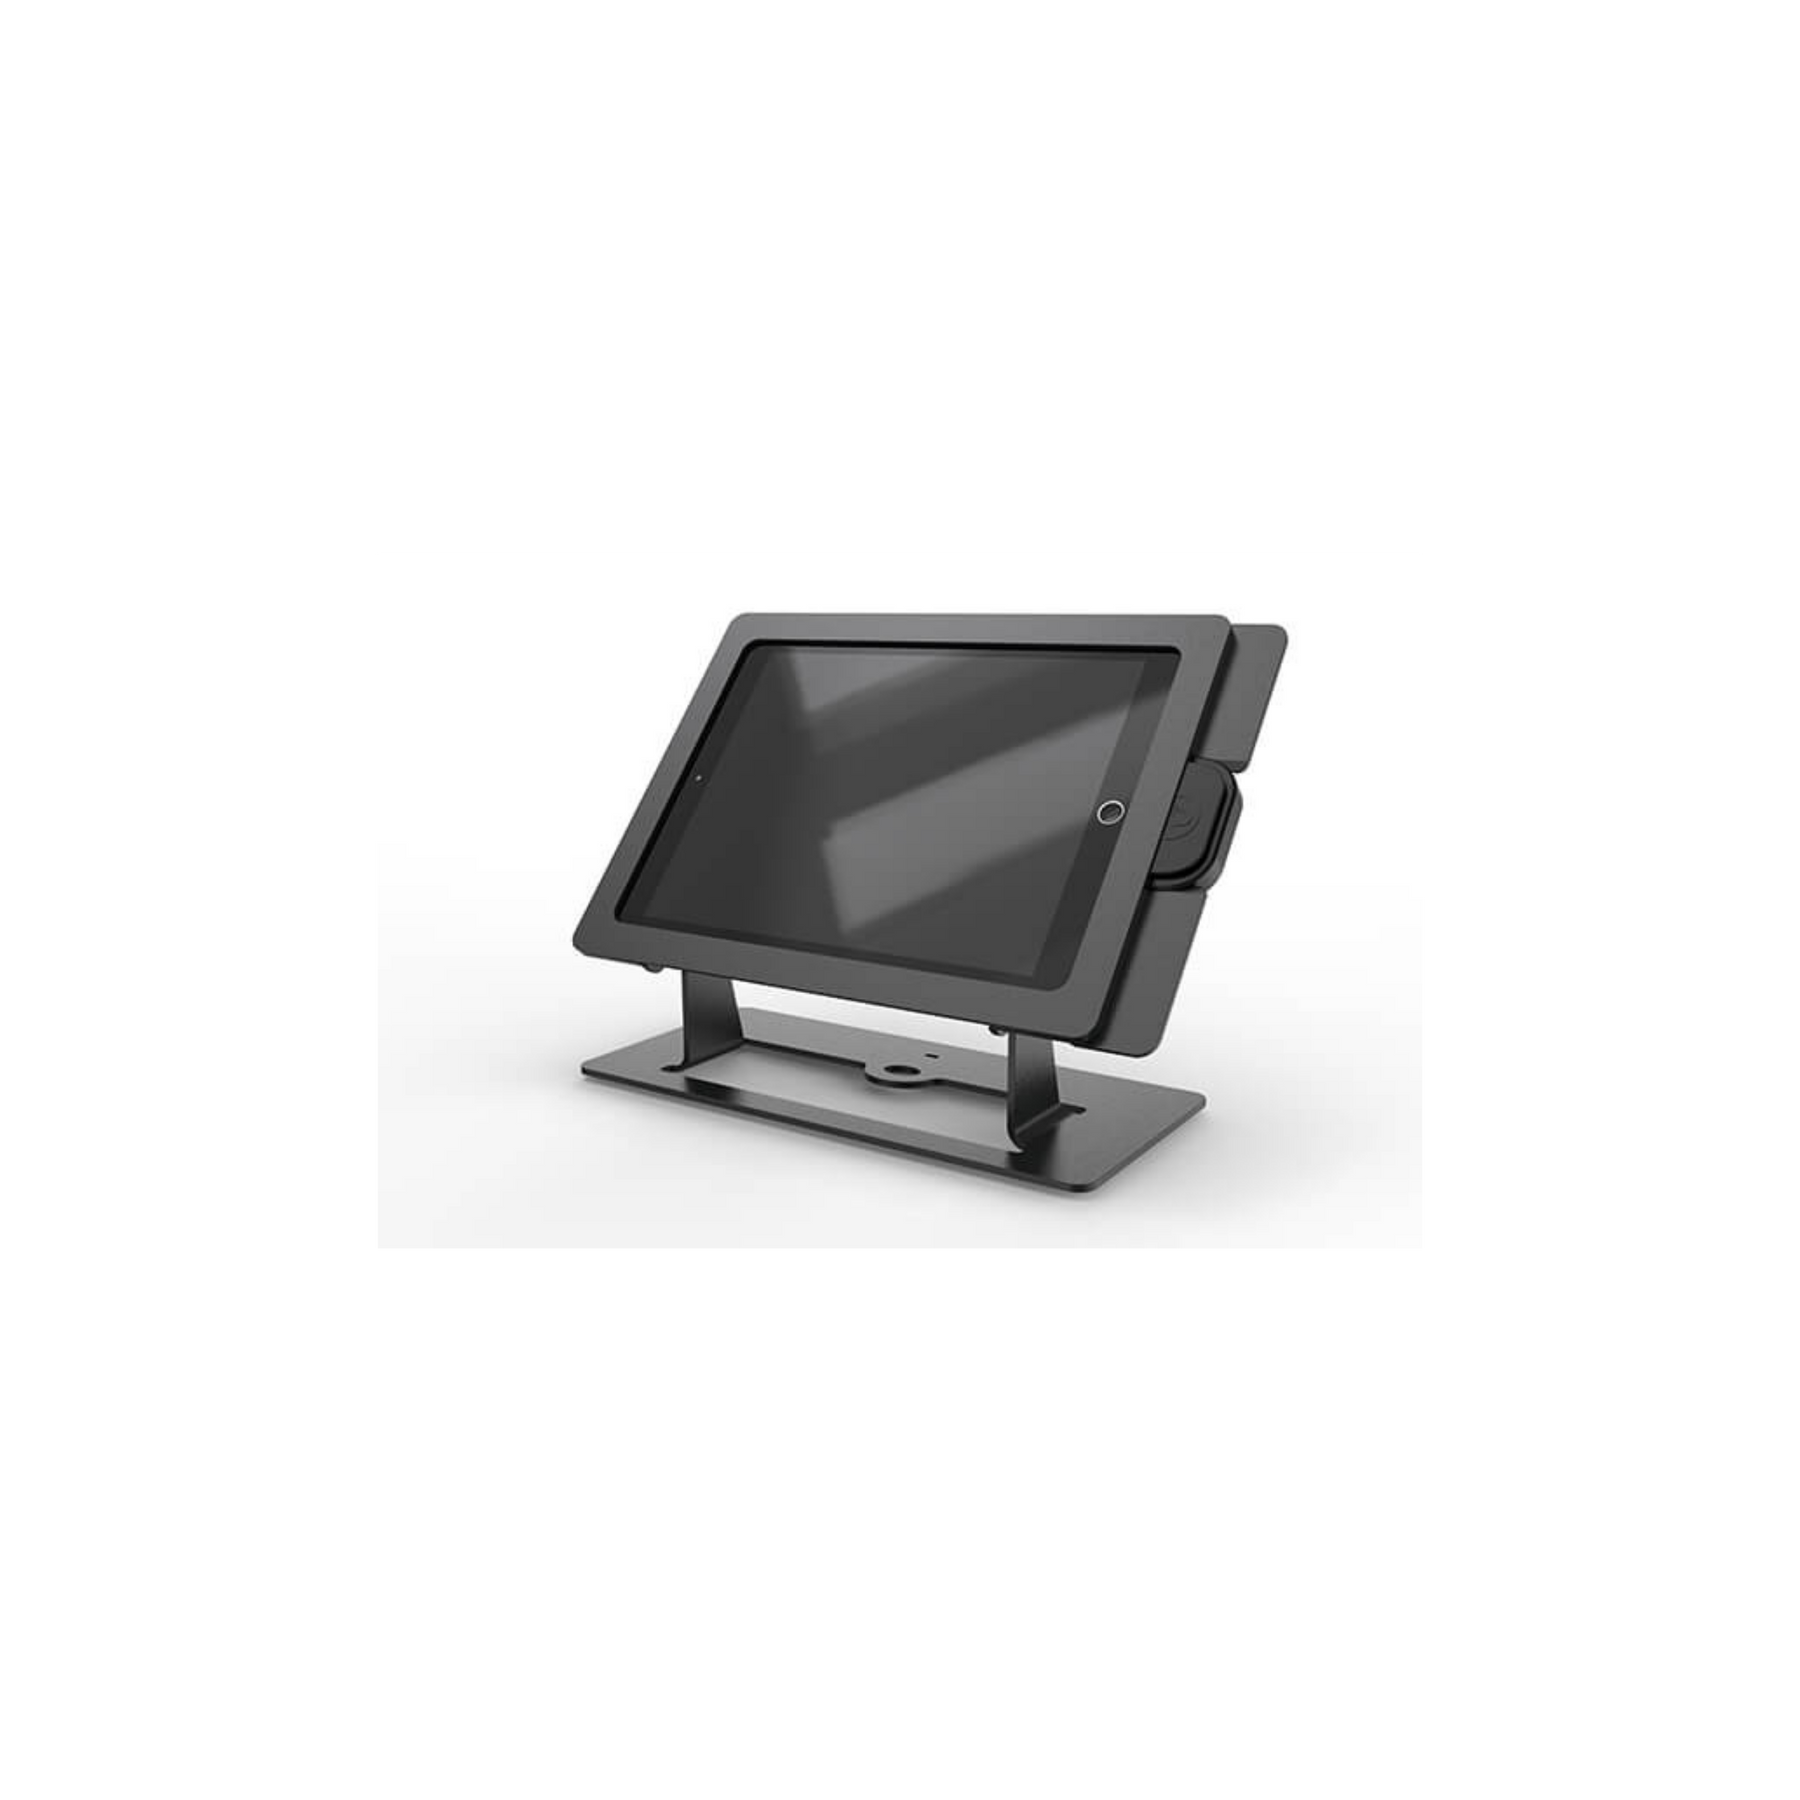 Heckler Windfall Stand, Check Out Stand Tall, Black Grey for IPAD Air 1,2, IPAD Pro 10.2" IPAD 7TH Gen